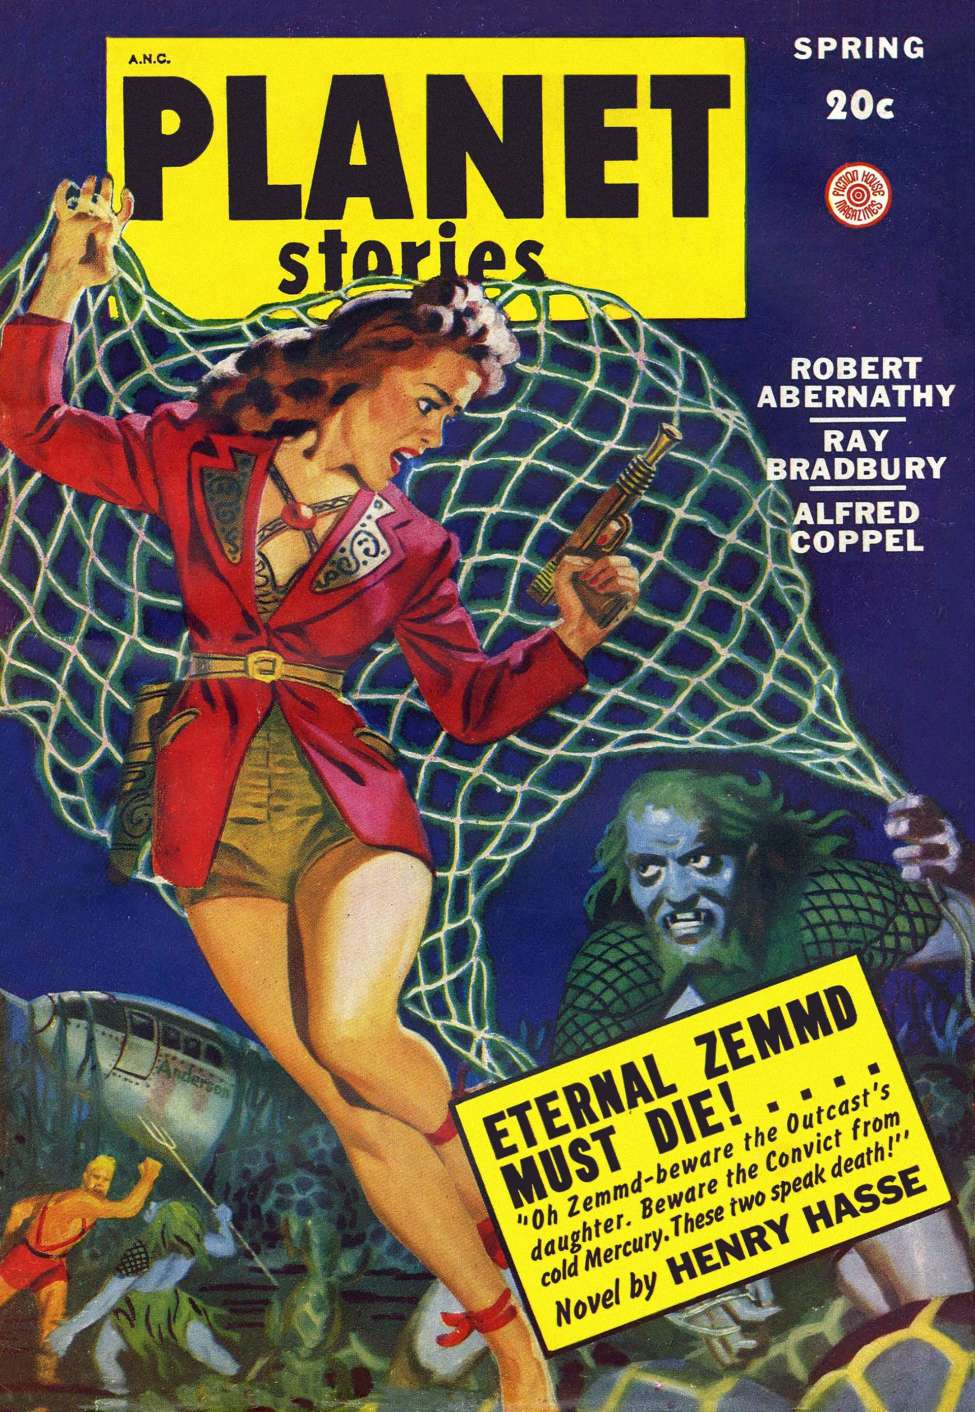 Comic Book Cover For Planet Stories v4 2 - Eternal Zemmd Must Die! - Henry Hasse